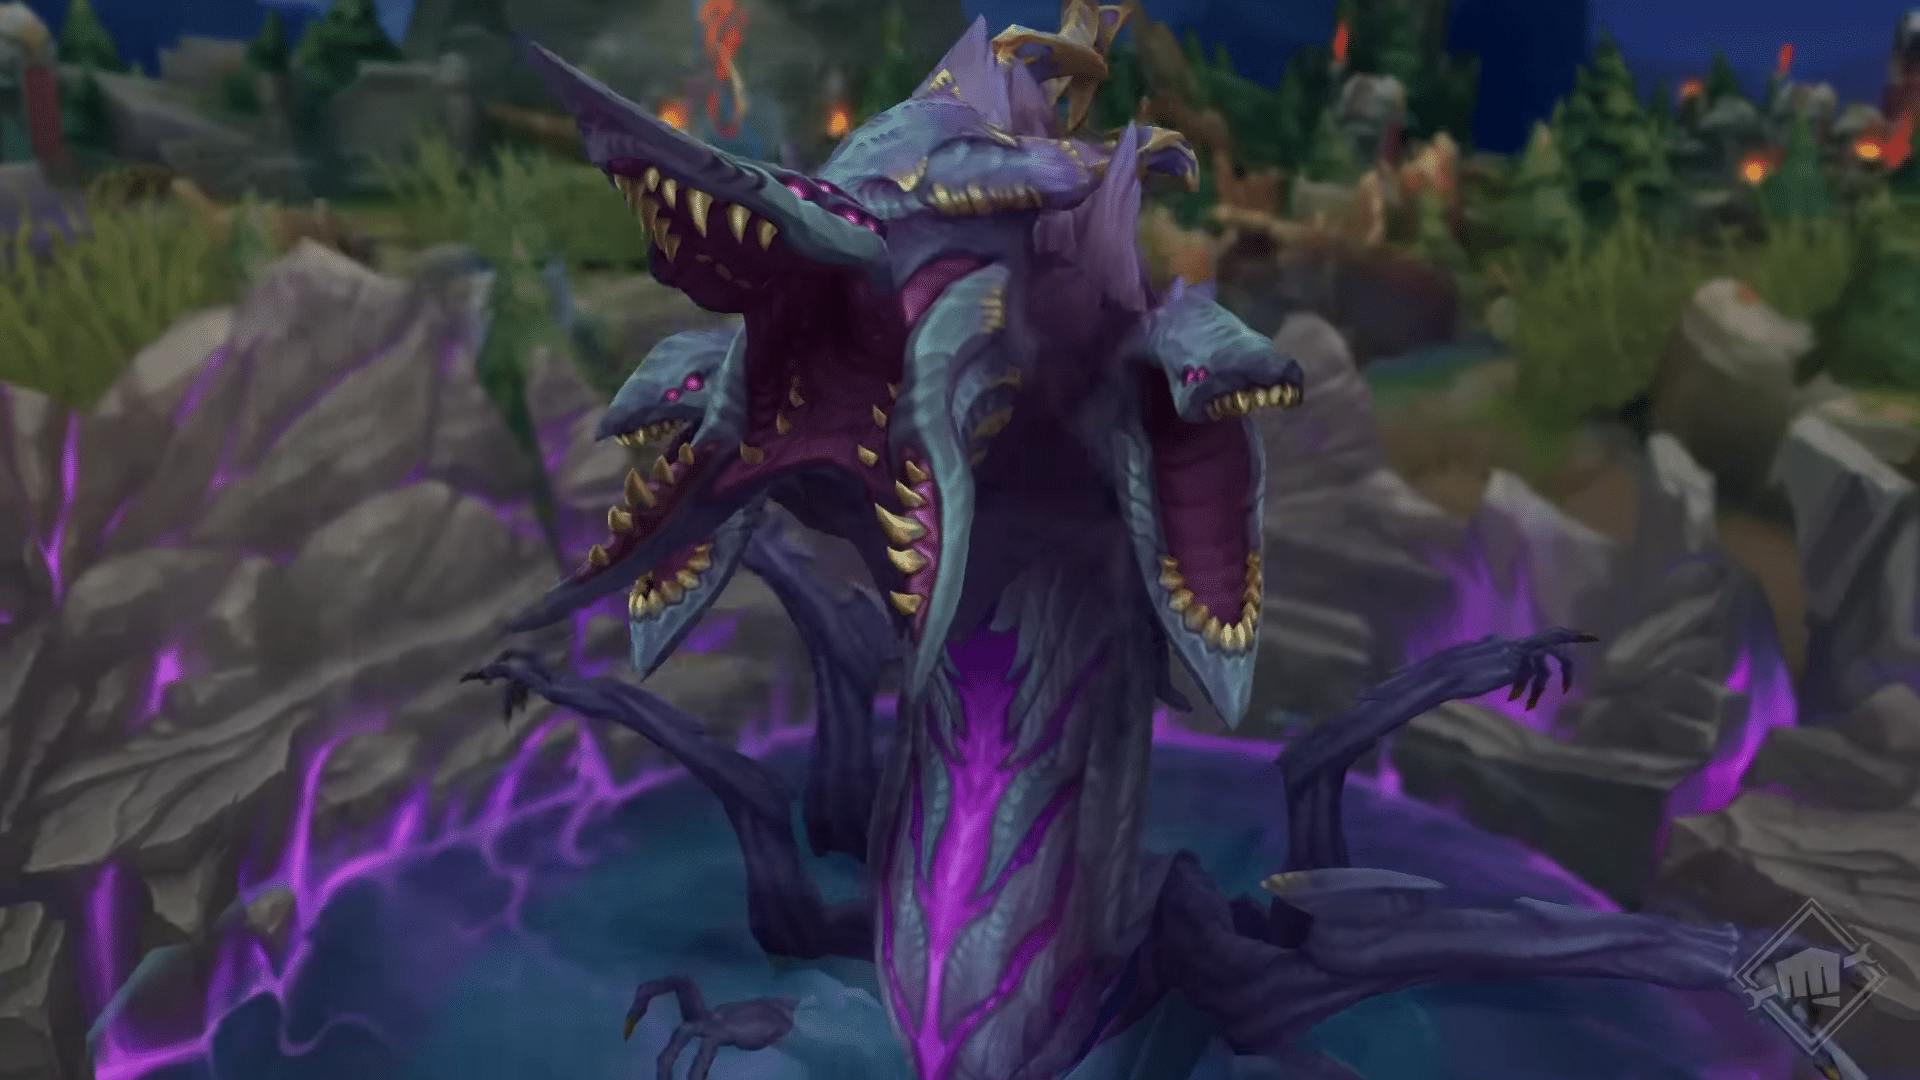 Baron will get some visual updates in LoL patch 14.1.